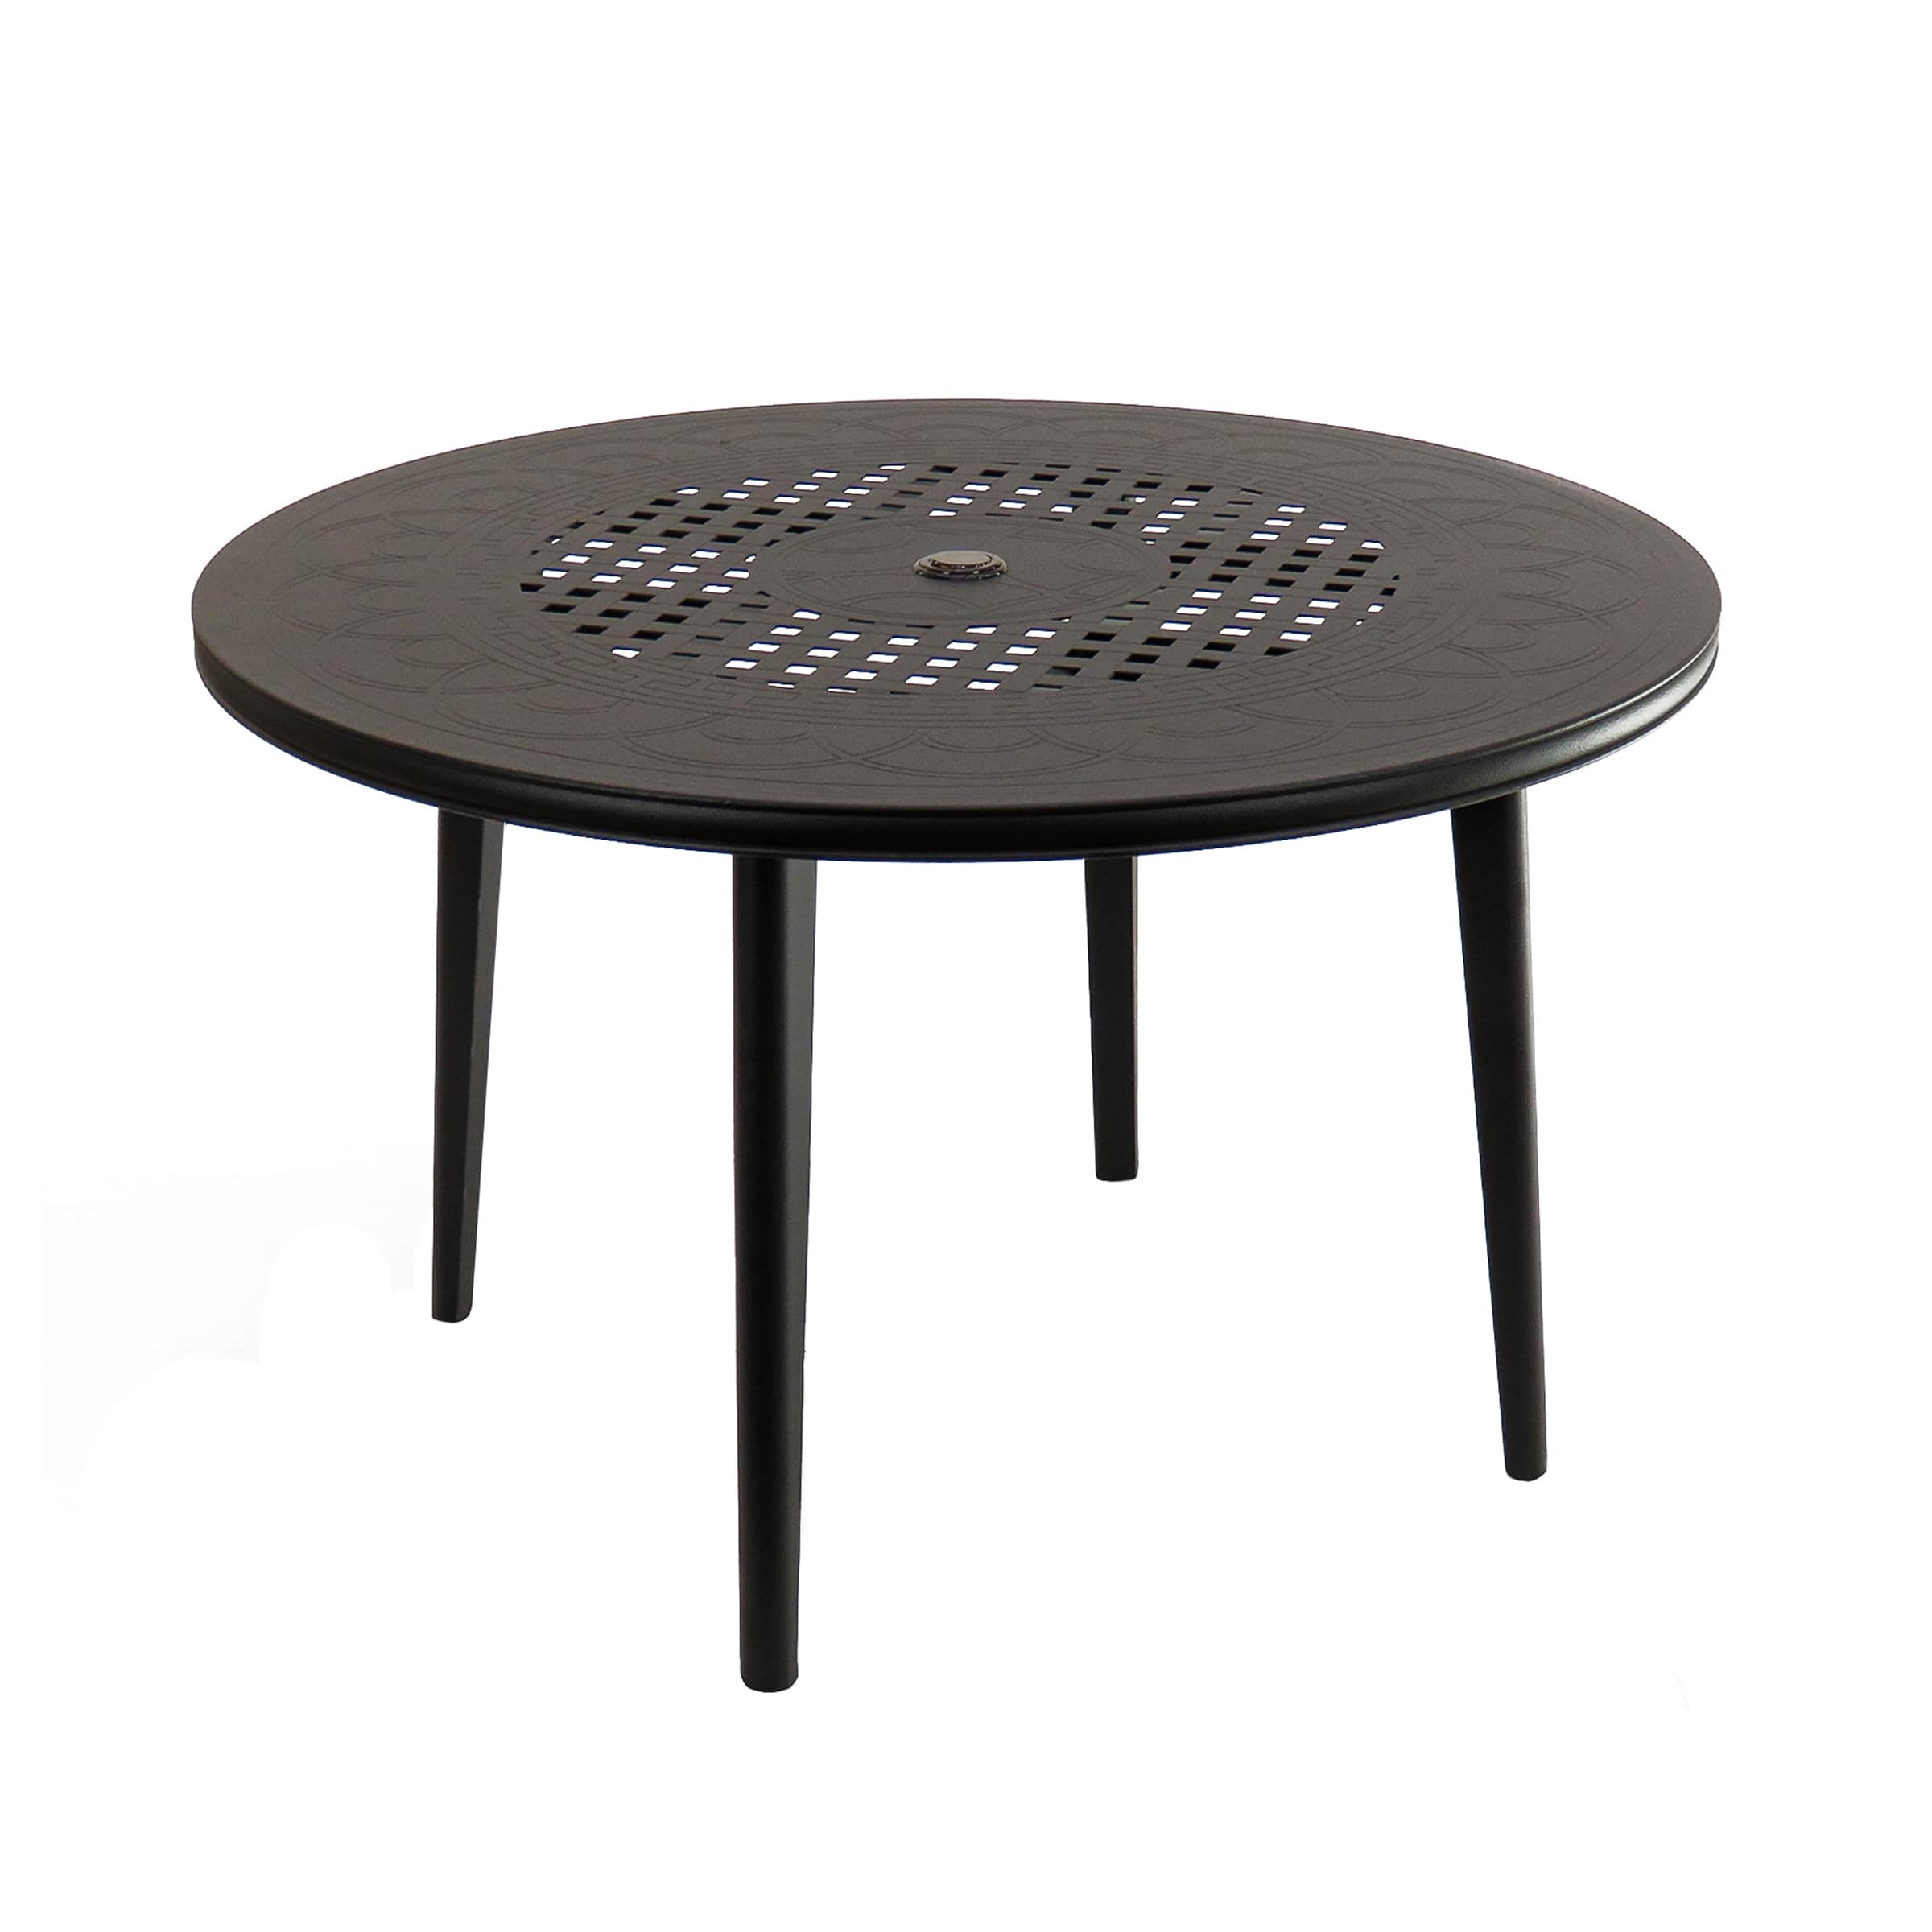 Darby Collection All-Weather Round Dining Table